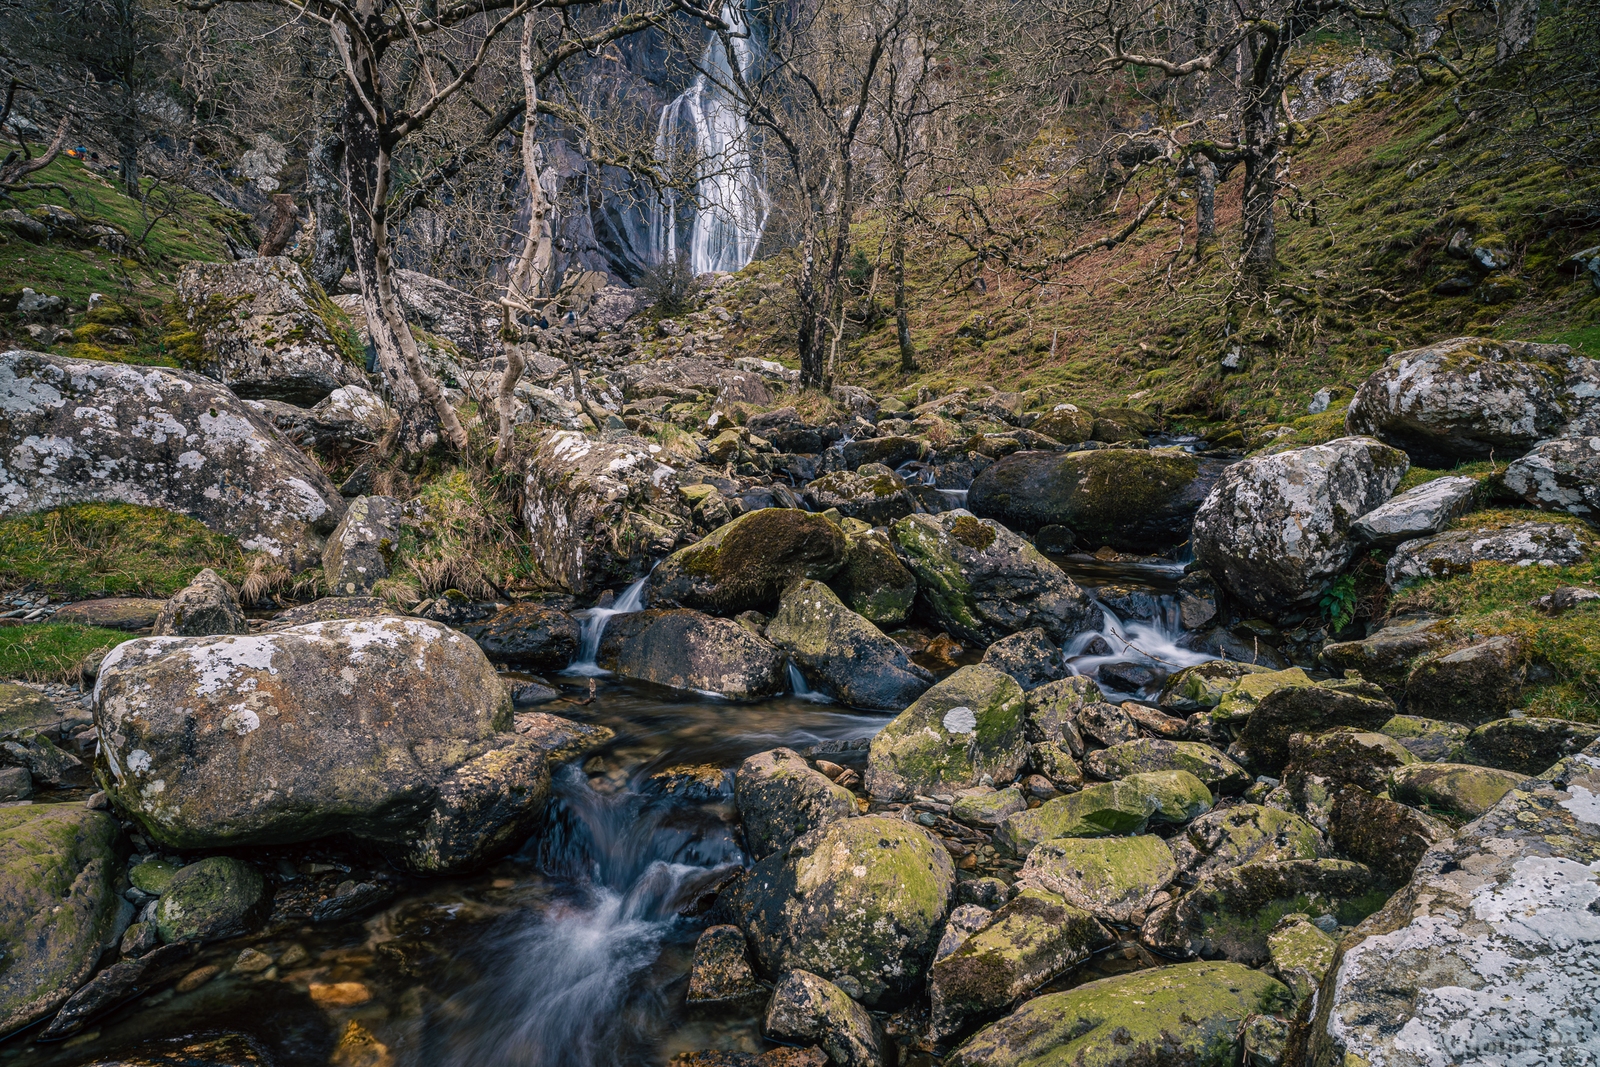 Image of Aber Falls by James Billings.